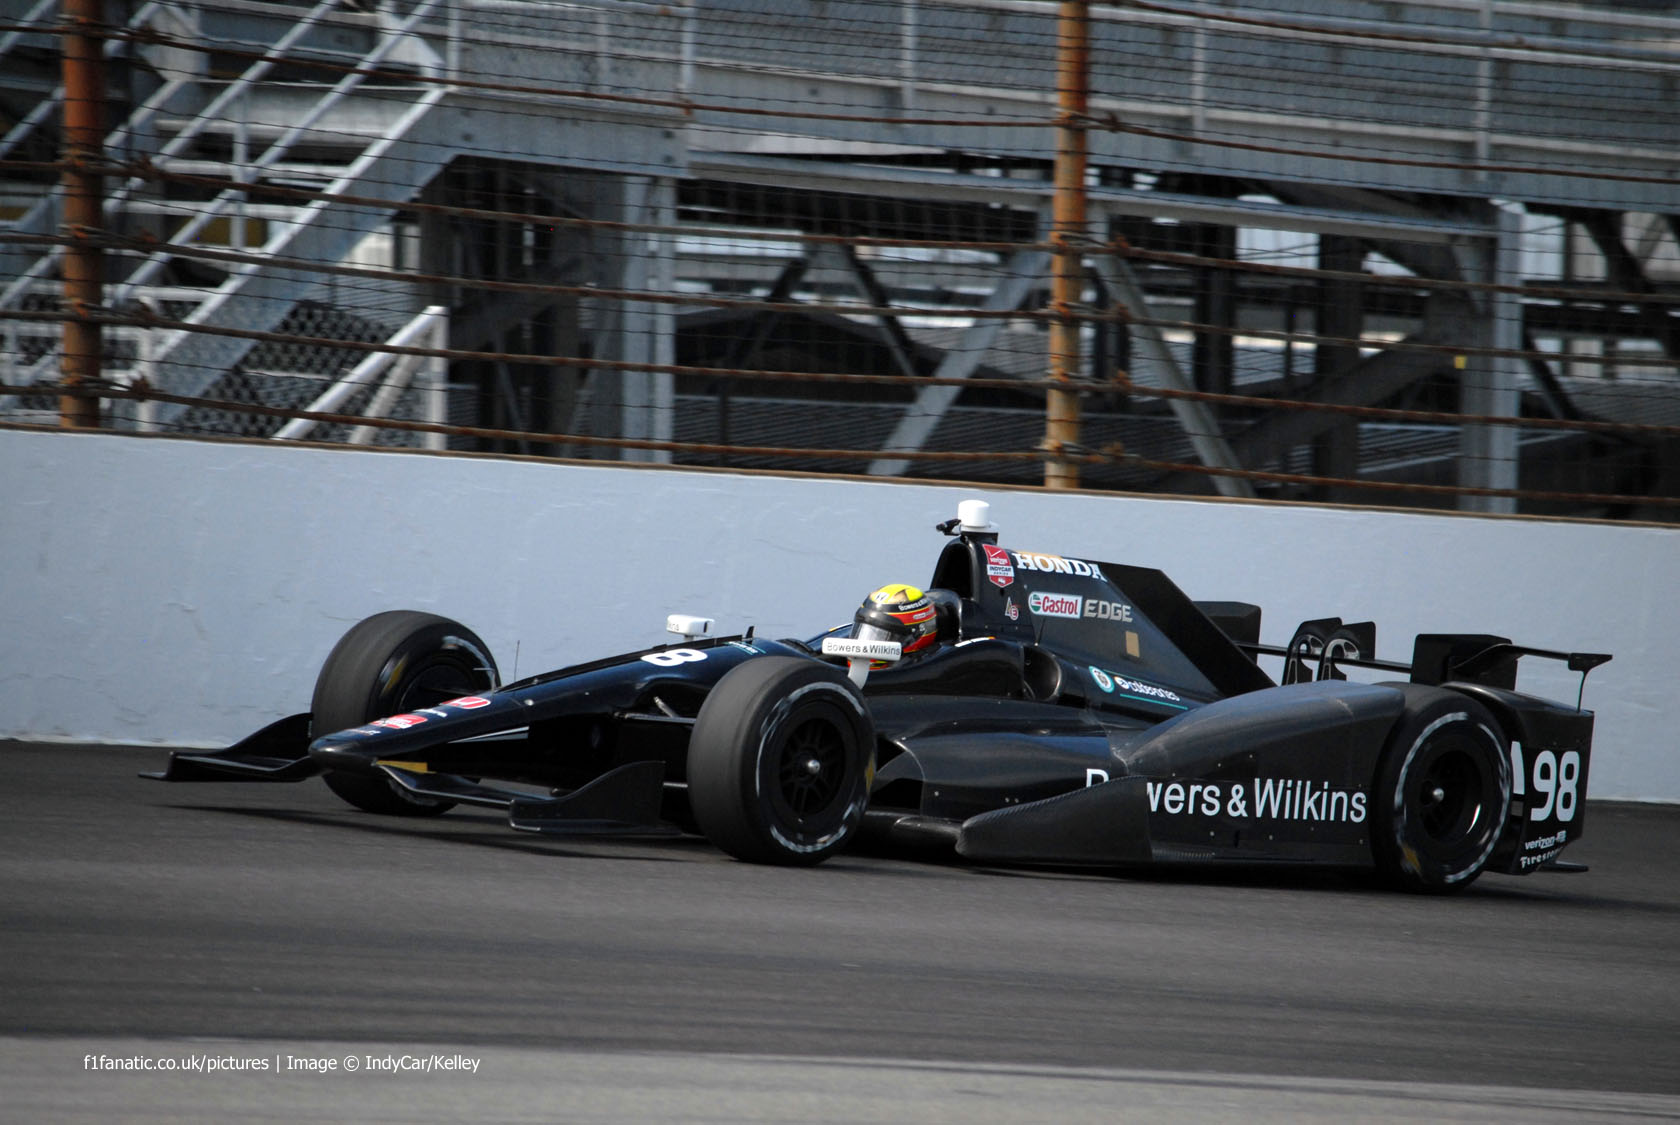 gabby-chaves-indycar-indianapolis-2015.jpg